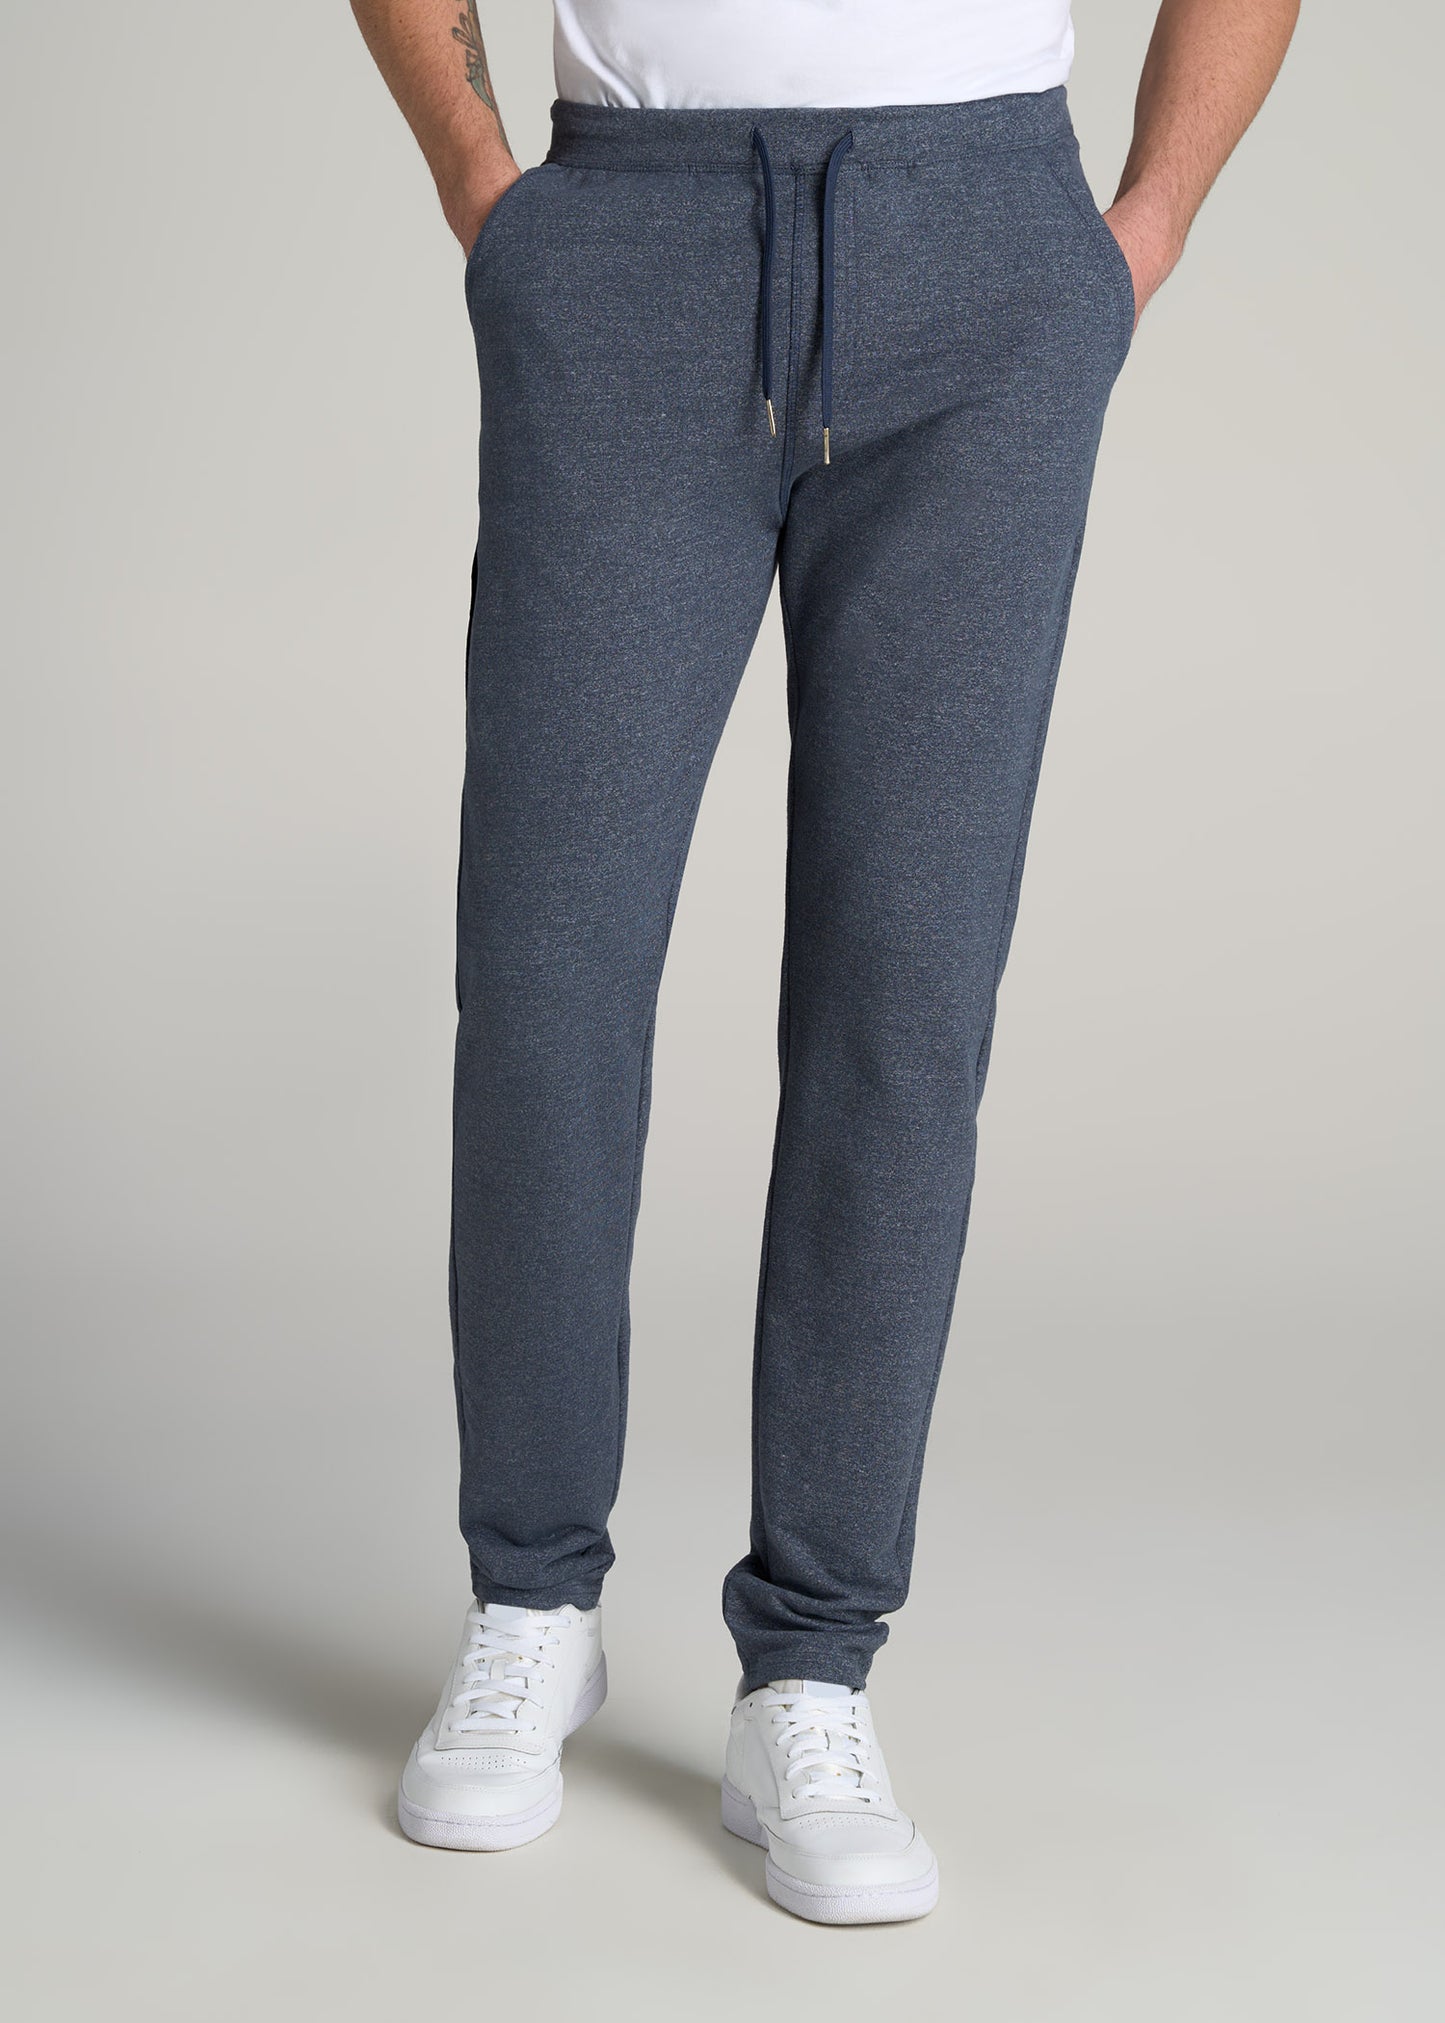    American-Tall-Men-Microsanded-French-Terry-Sweatpant-Navy-Mix-front